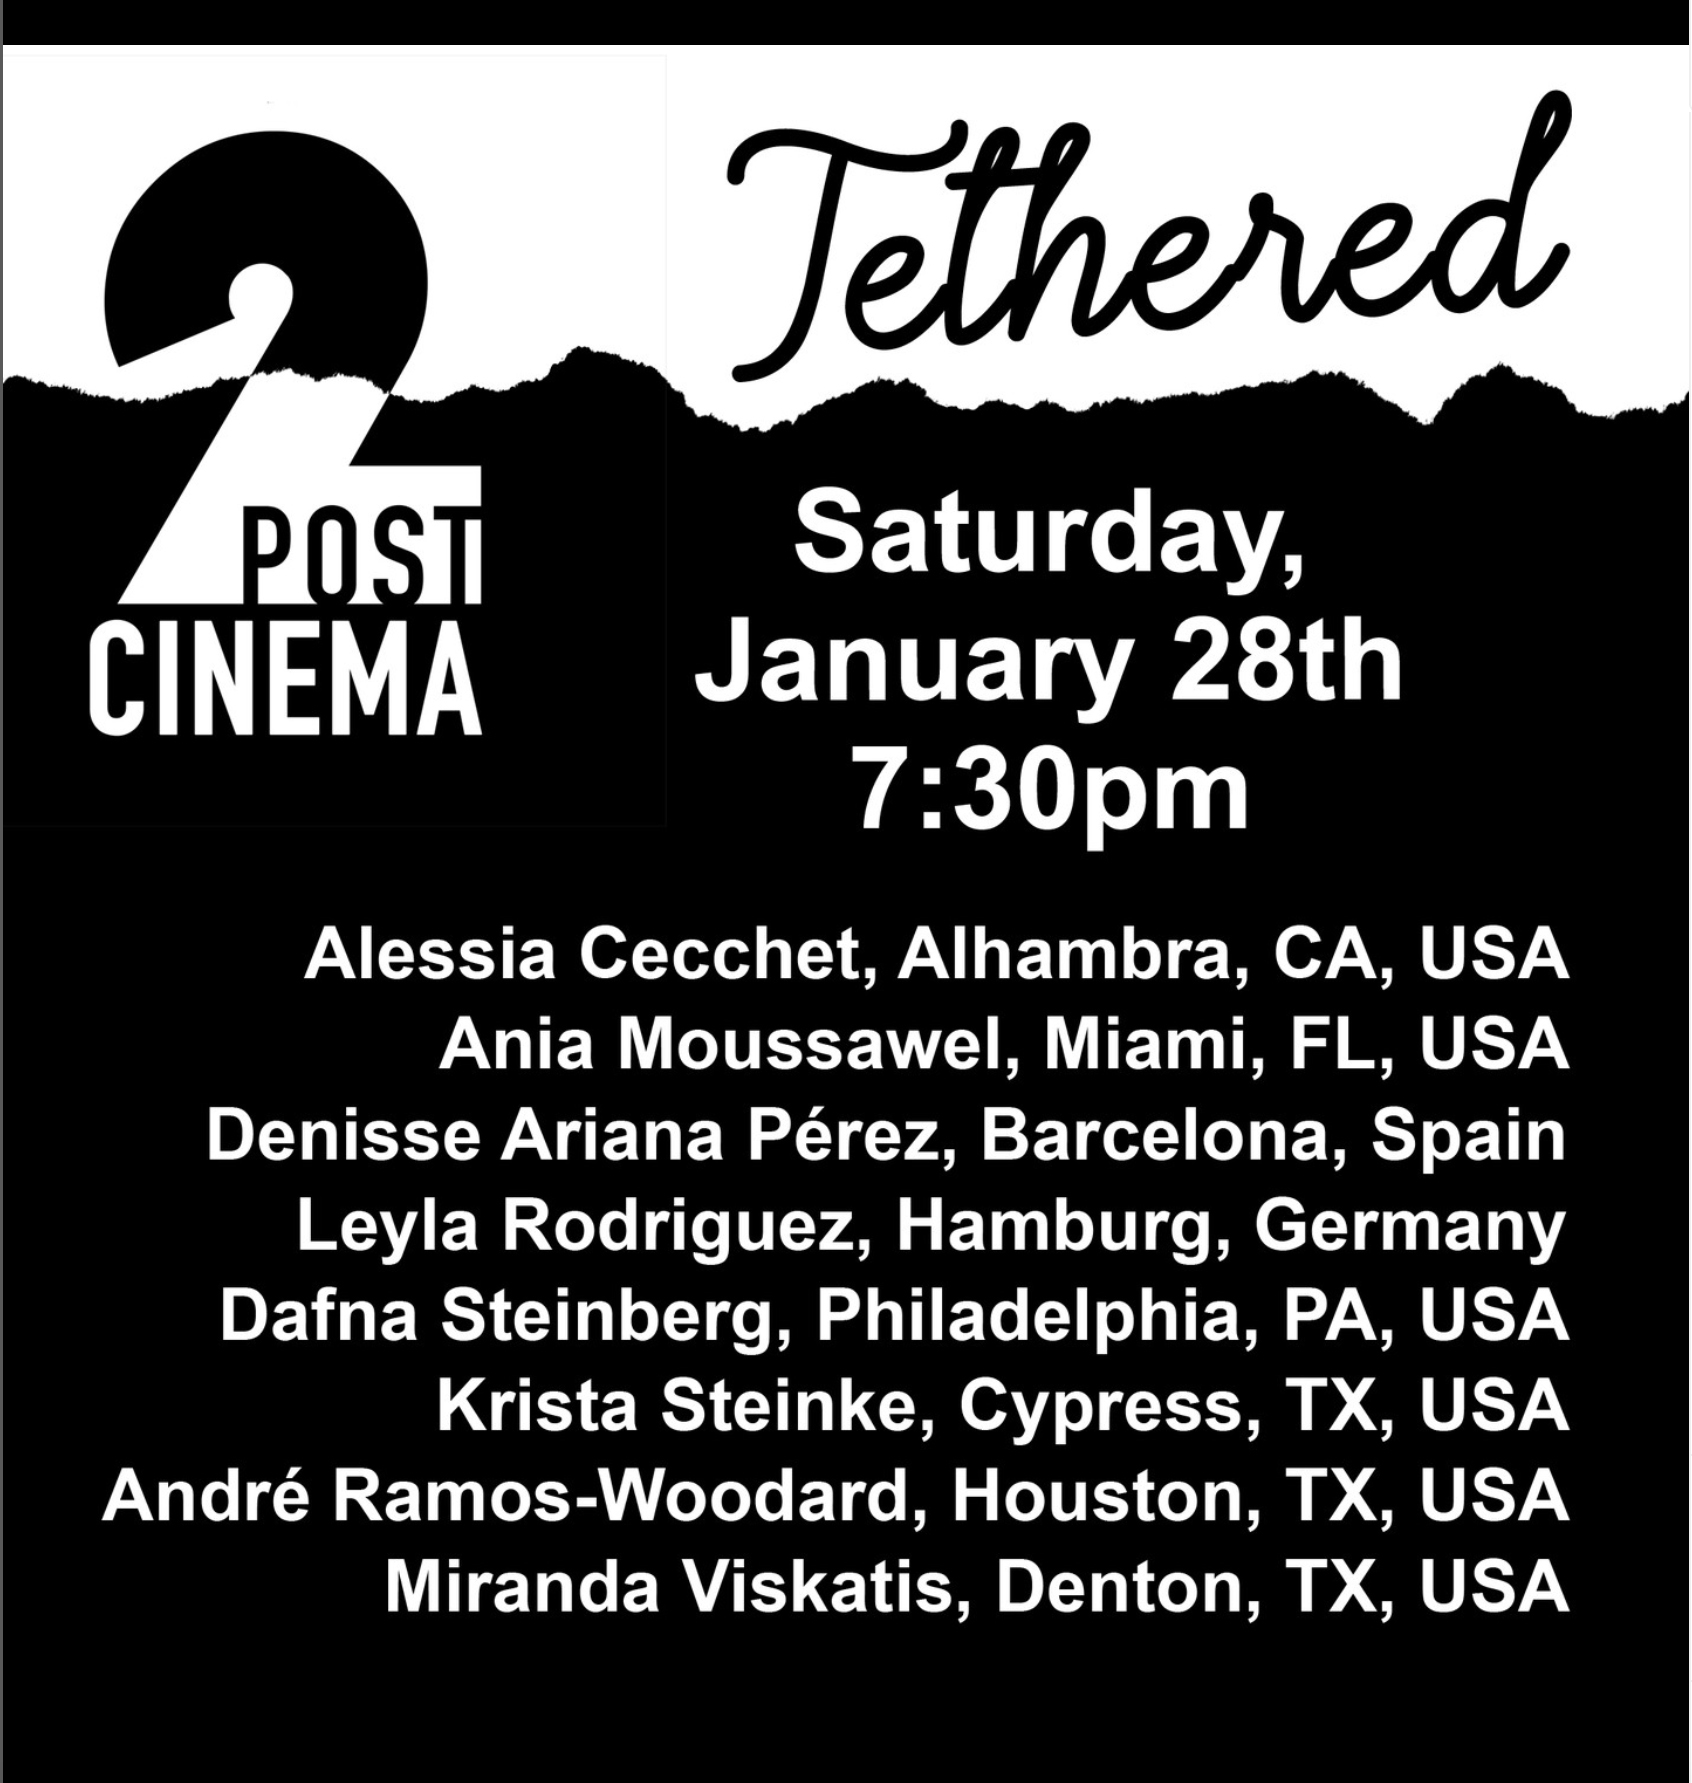 Waldhorn by Leyla Rodriguez at the "2 Post Cinema" January 28th, 7:30 pm a outdoor cinema in Houston, Texas/ USA